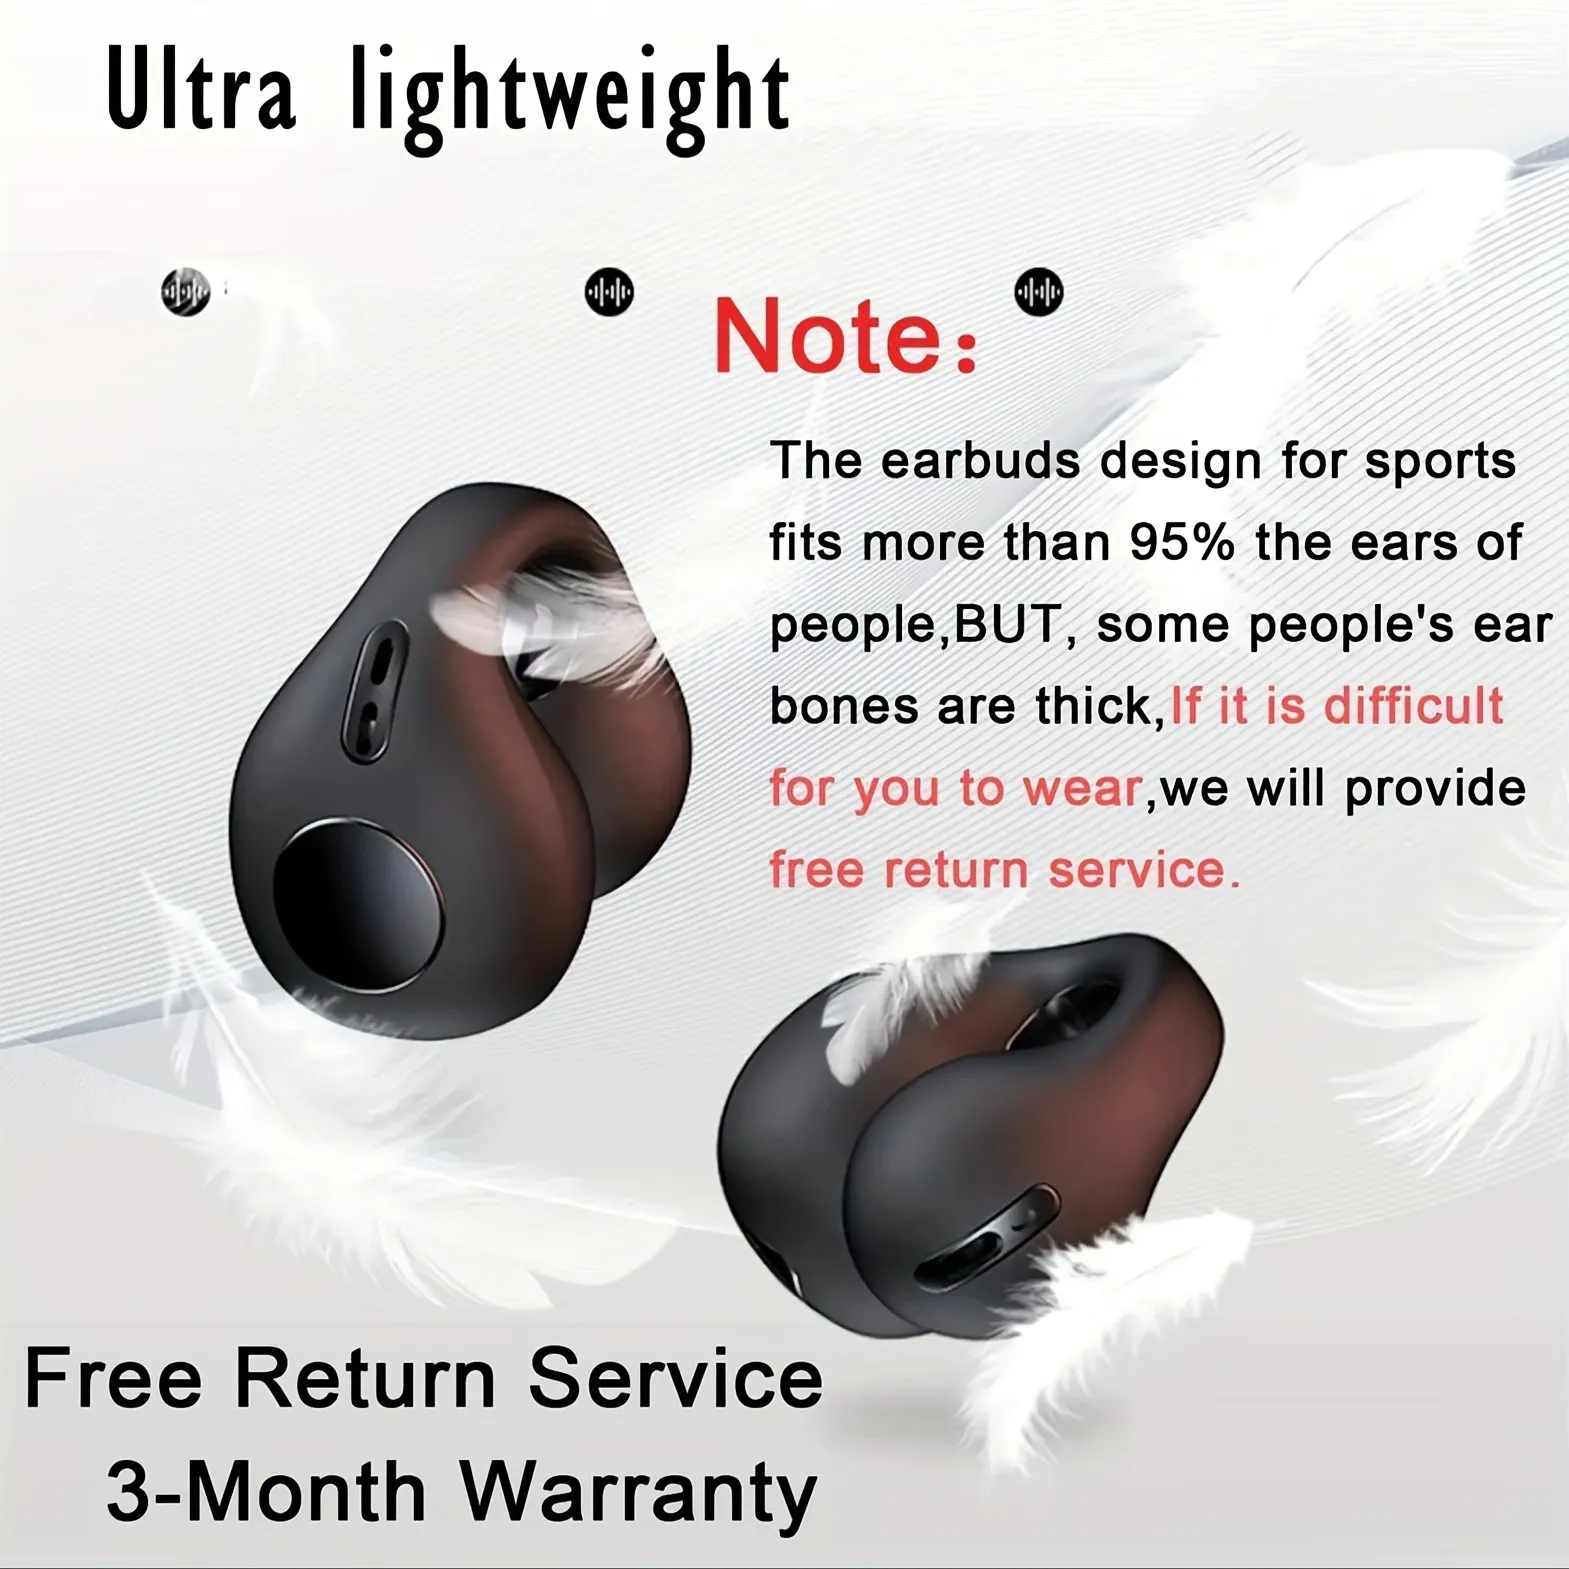 Open Ear Headphones Clip On Earbuds Sports Wireless Stereo Sound Headset With Microphone Workouts Running Earphone Earbuds Red Black Beige